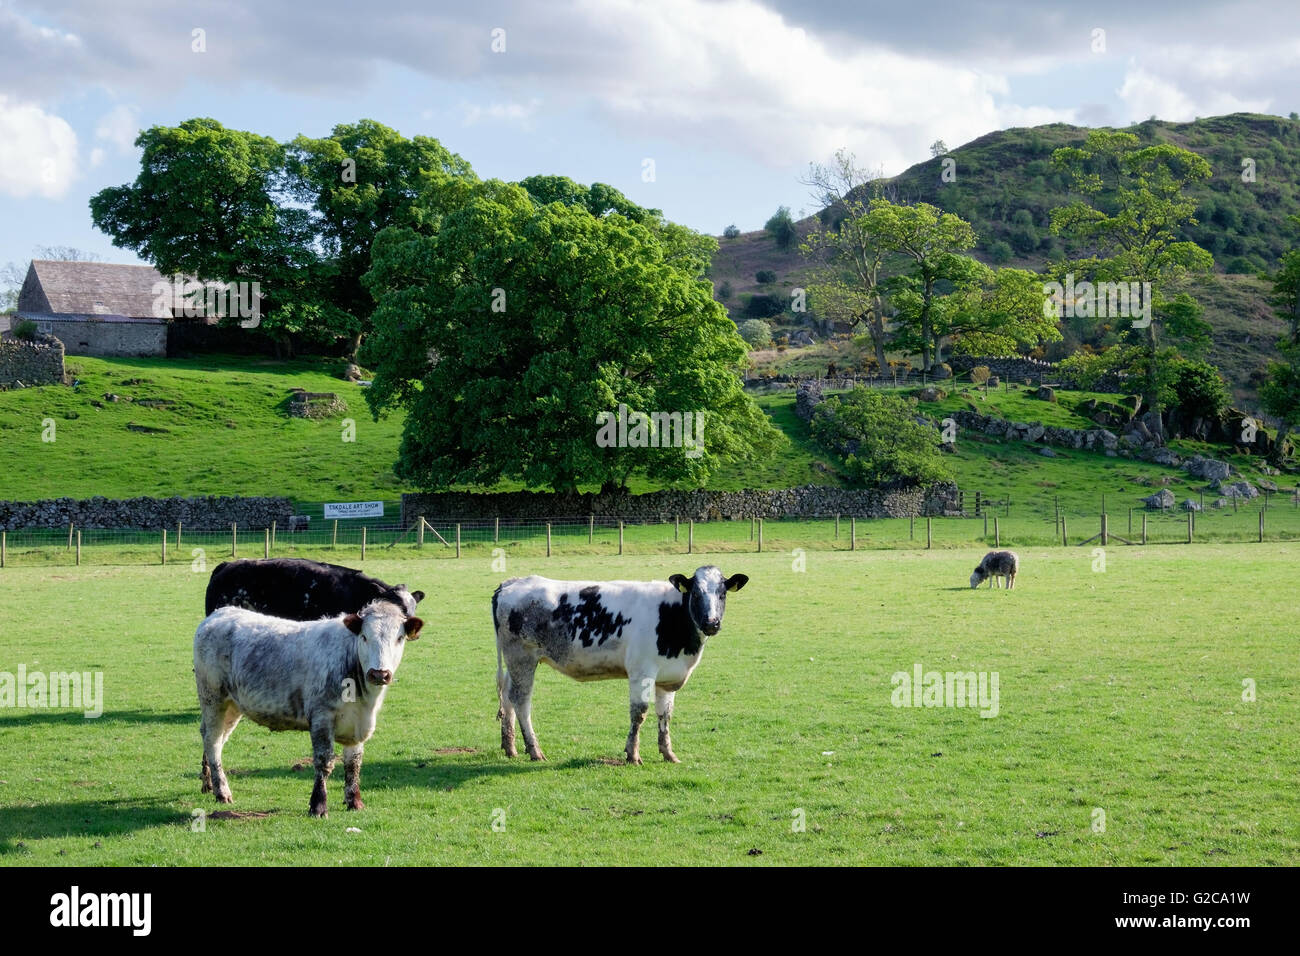 Friesians cows in a country farm field with trees. Stock Photo